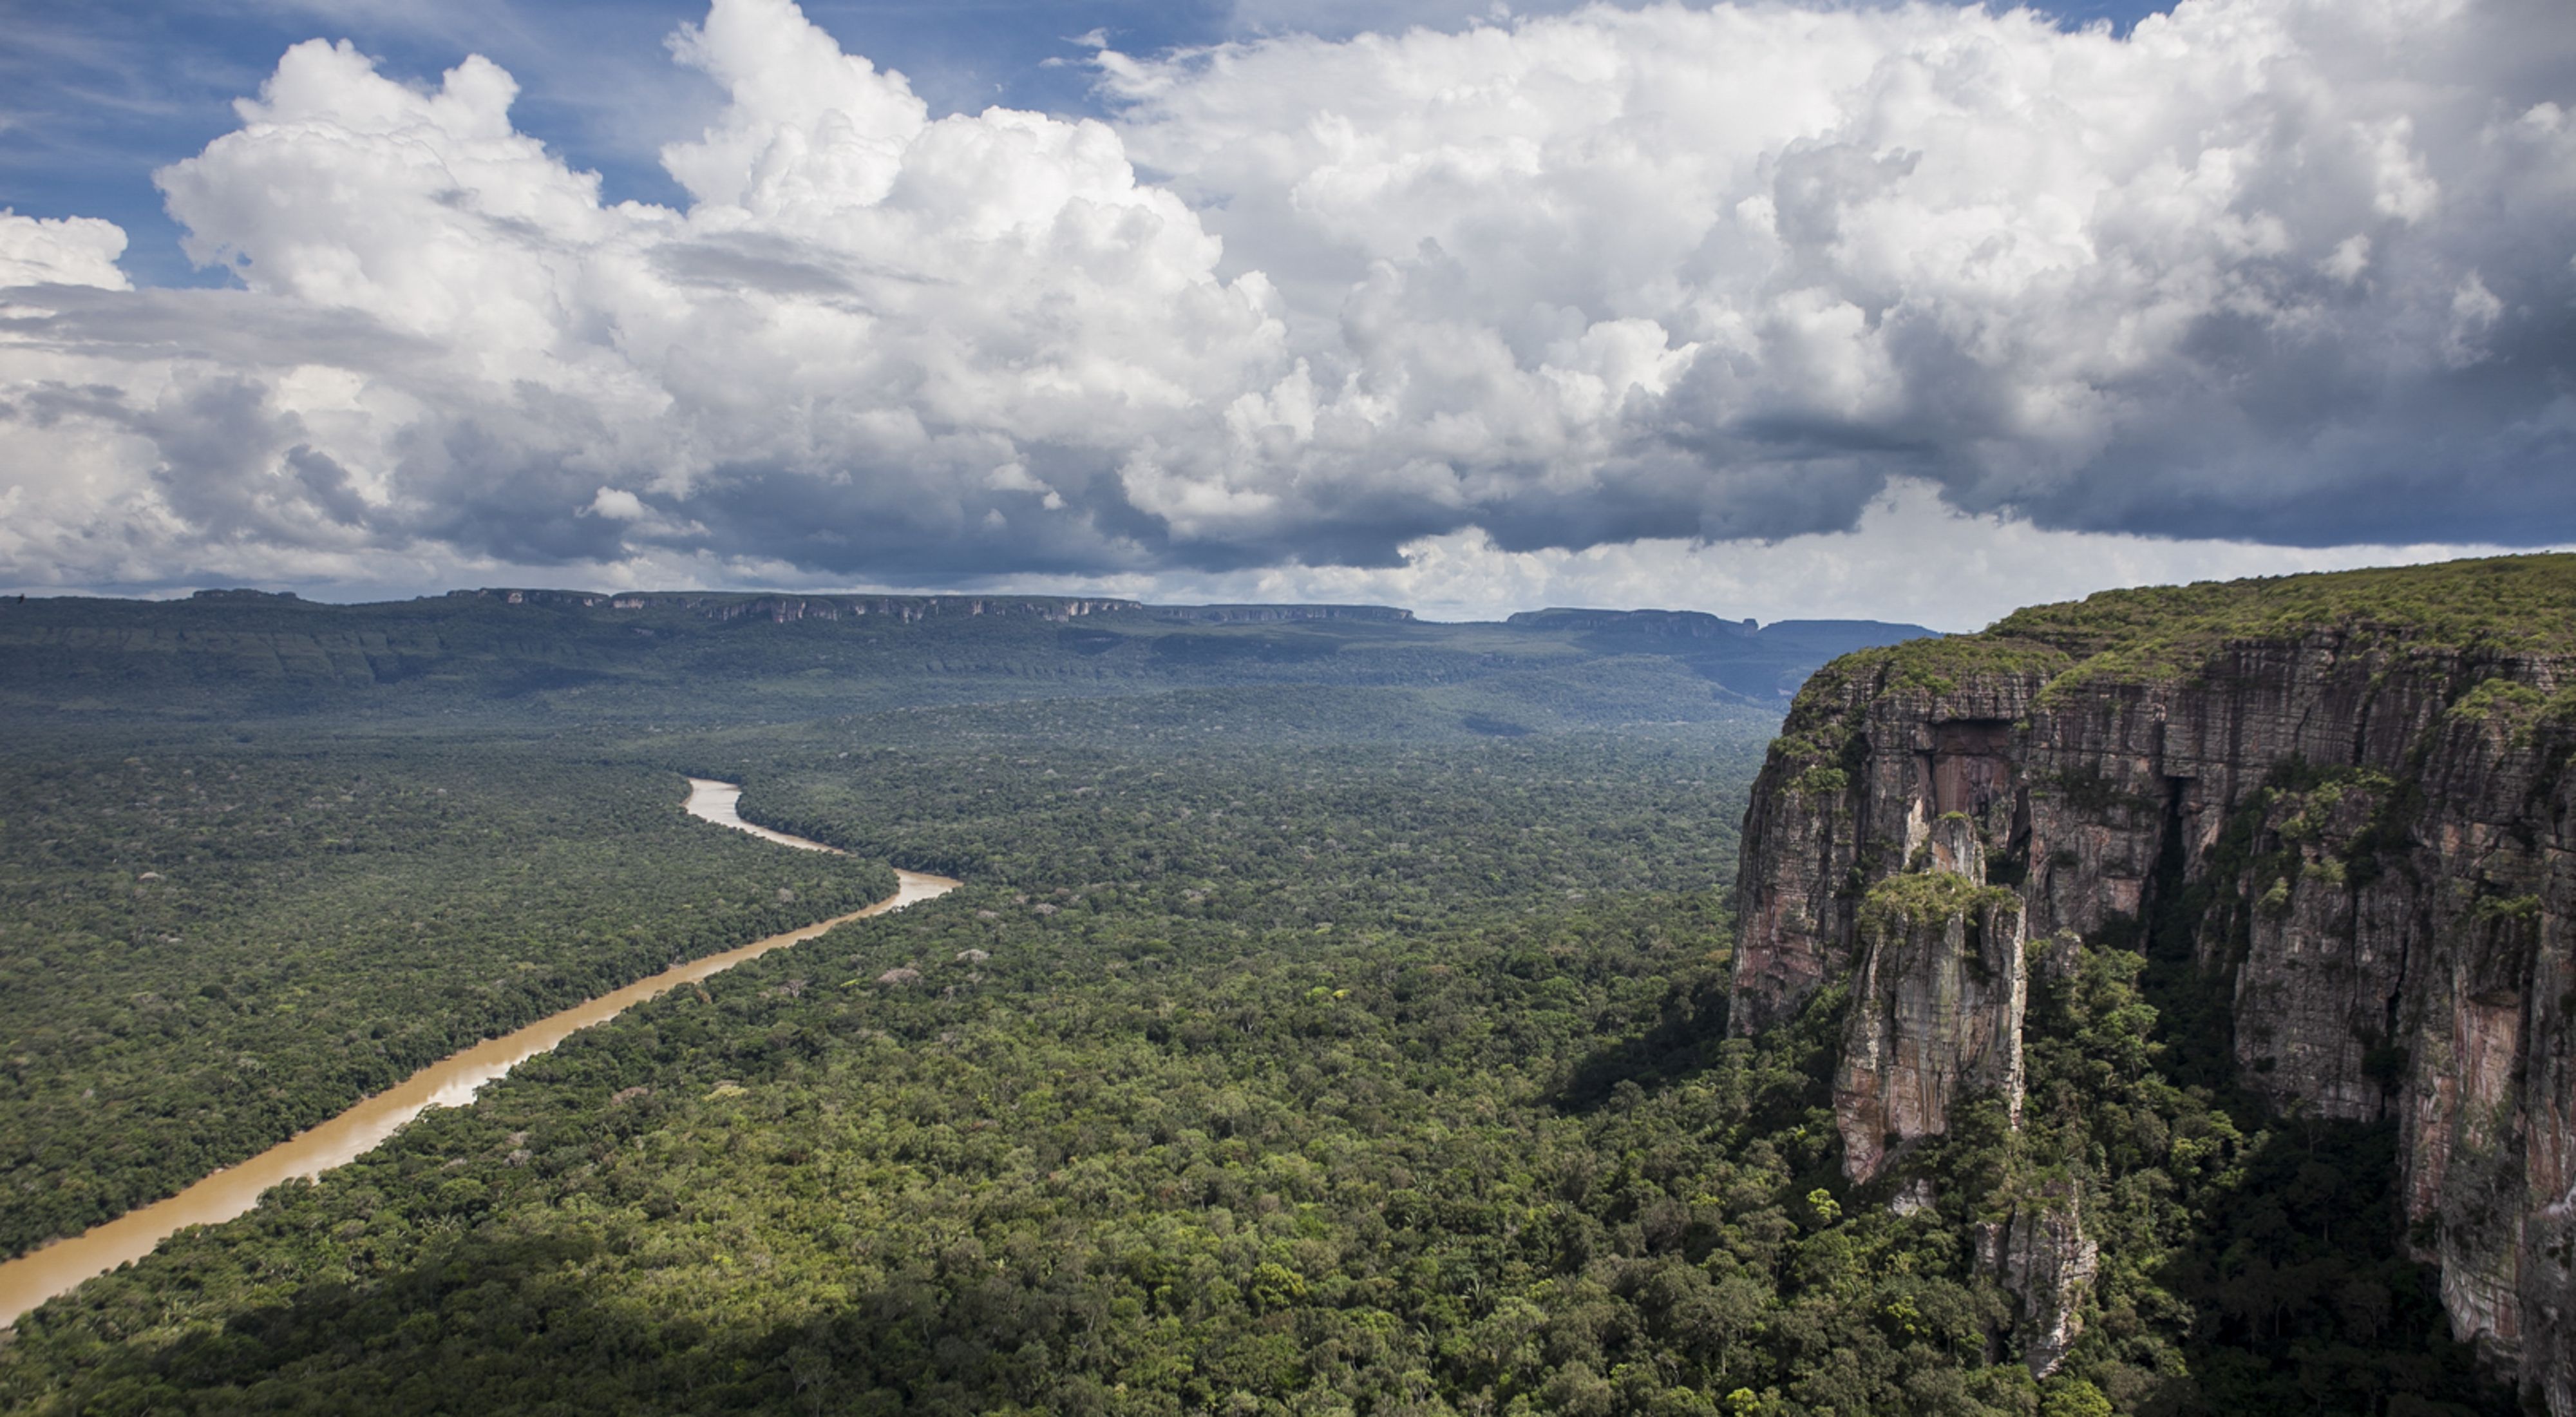 The Nature Conservancy in Colombia